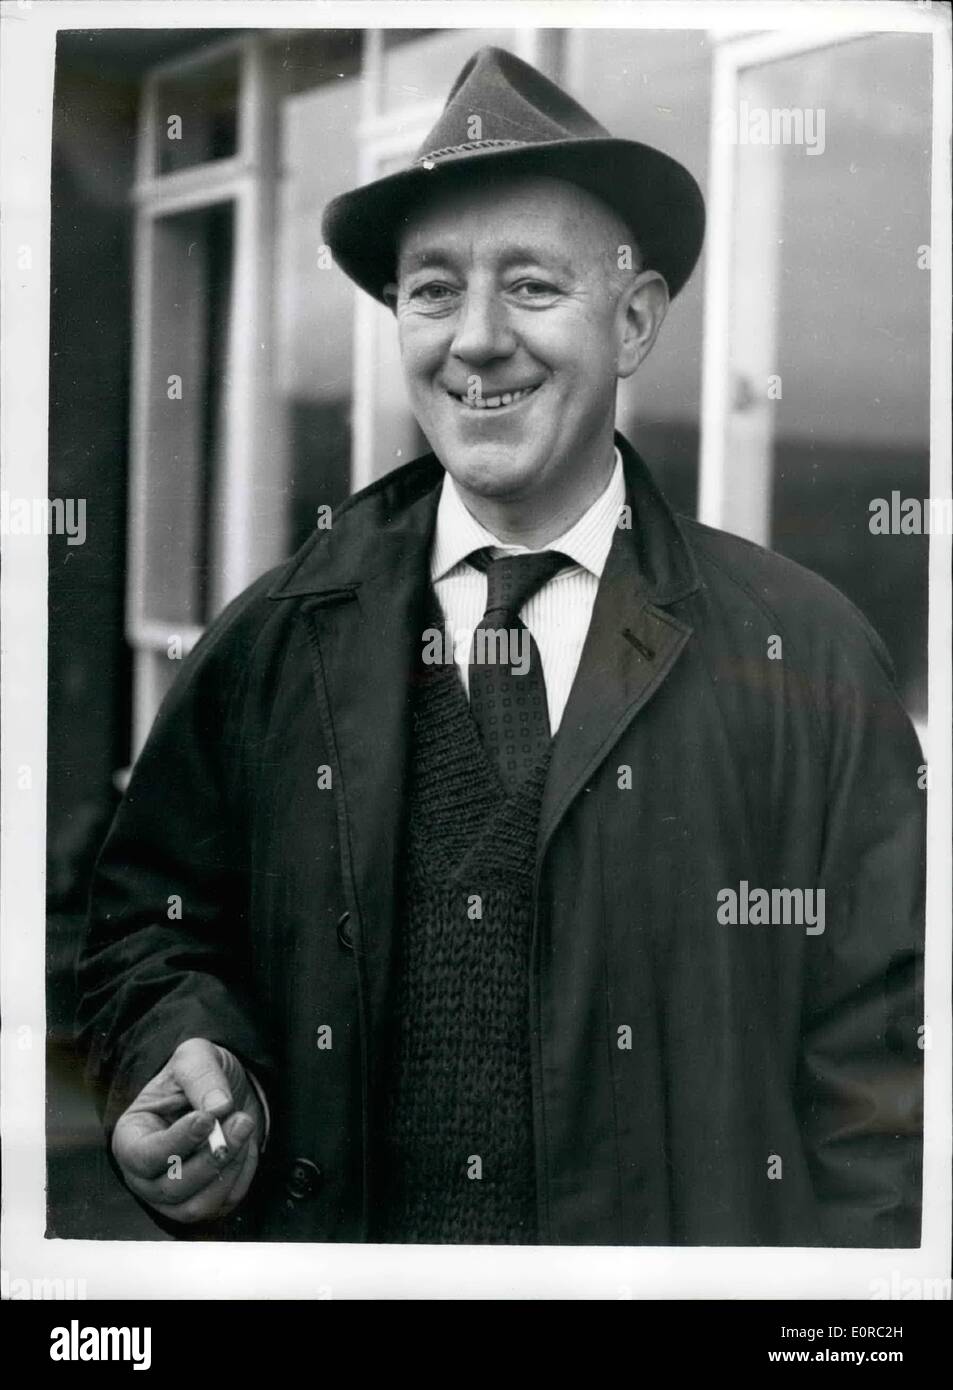 Jan. 01, 1959 - Actor Alec Guiness Receives A Knighthood In The New Year Honours List: Actor Alec Guiness, acclaimed on both sides of the Atlantic as Best Actor of the Year for his performance in the film ''The Bridge over the river Kwai'' has been awarded a Knighthood in the New Year Honours List, and now becomes Sir Alec Guinness. Photo shows Yesterday's picture of Sir Alec Guinness taken at his home in Petersfield Hampshire. Stock Photo